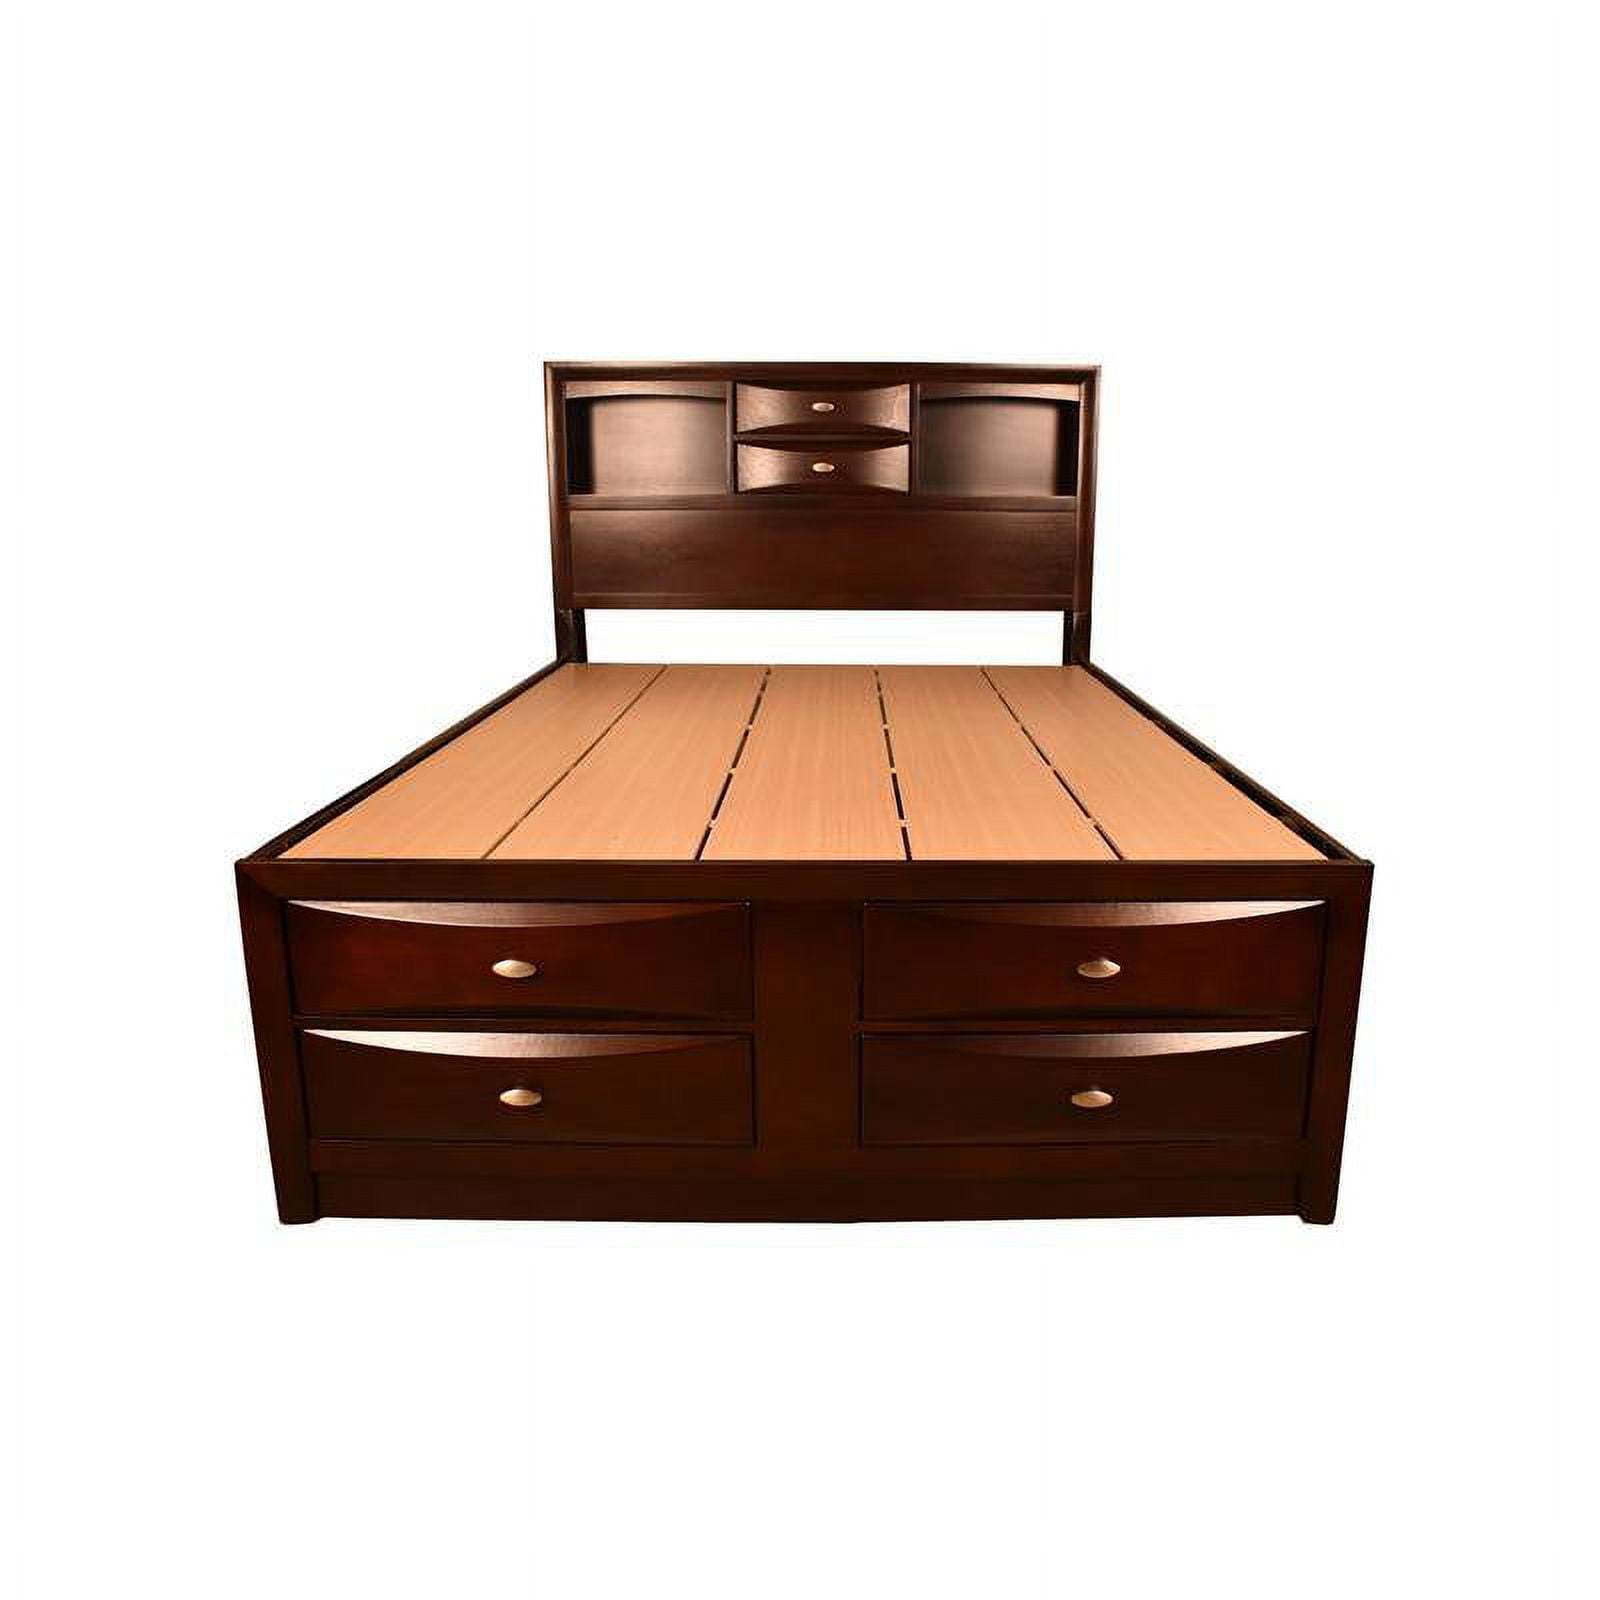 Buy solid sheesham wood bed online with storage in platform design -  Furniture Online: Buy Wooden Furniture for Every Home